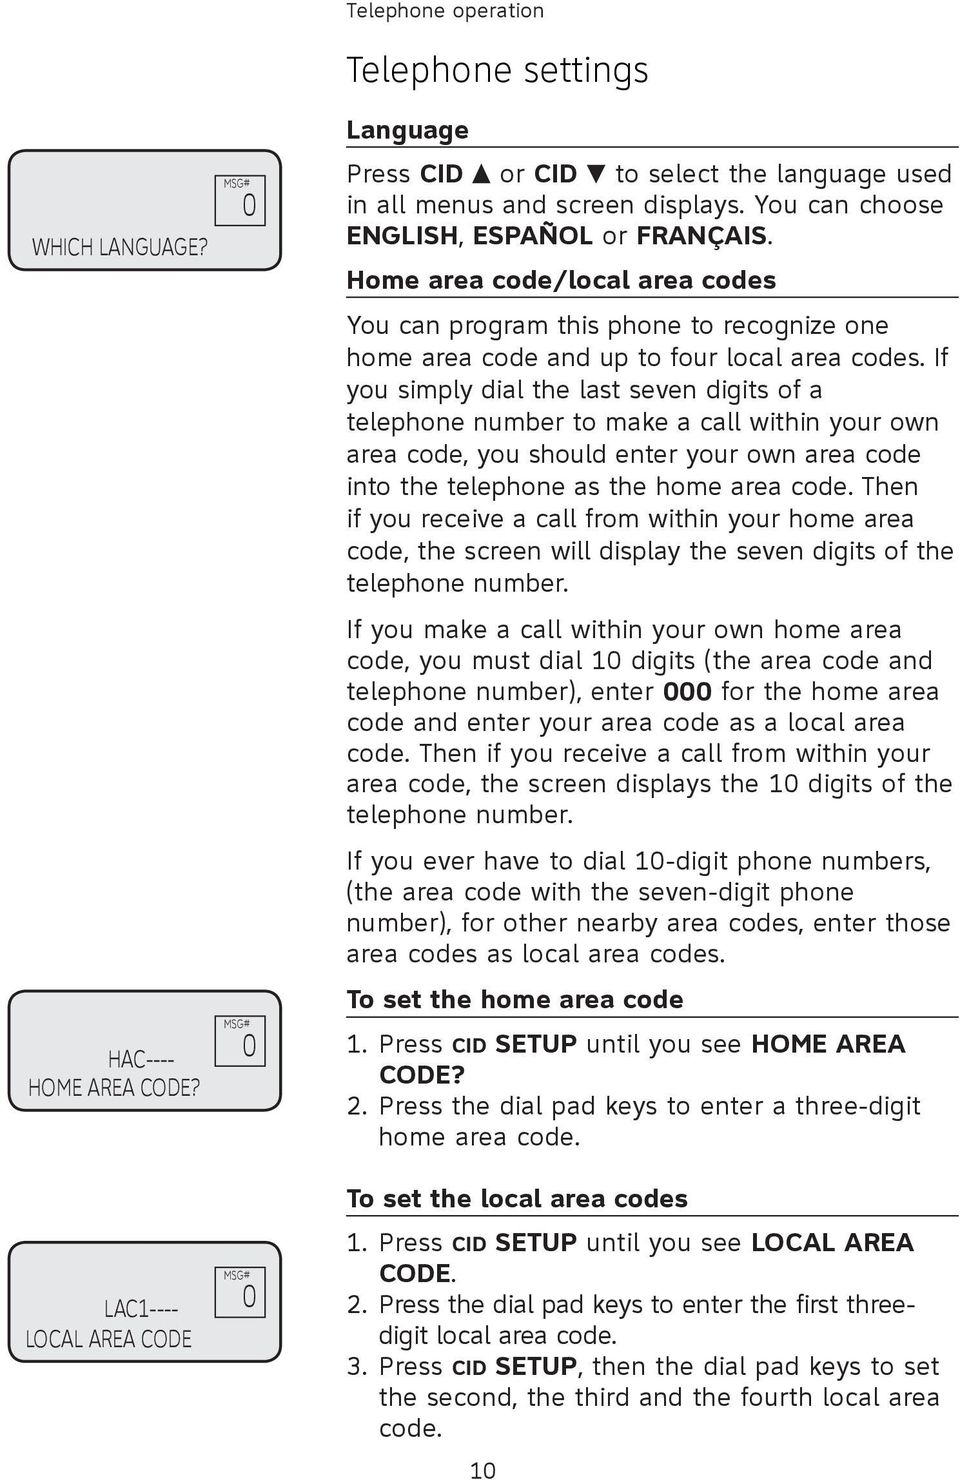 If you simply dial the last seven digits of a telephone number to make a call within your own area code, you should enter your own area code into the telephone as the home area code.